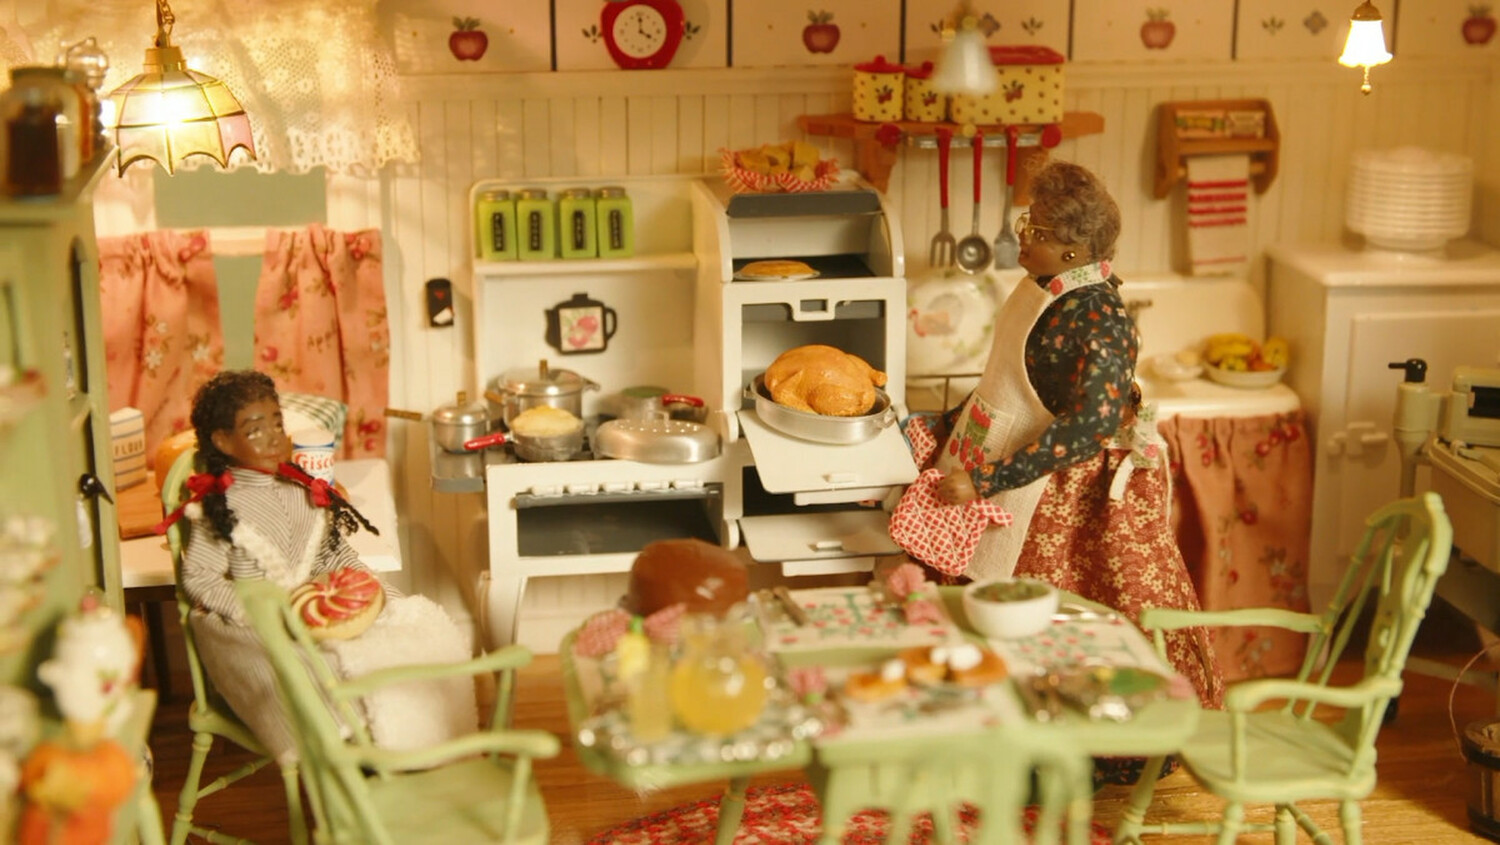 Glimpse of a dollhouse interior as seen in the “Our Alexandria” trailer.